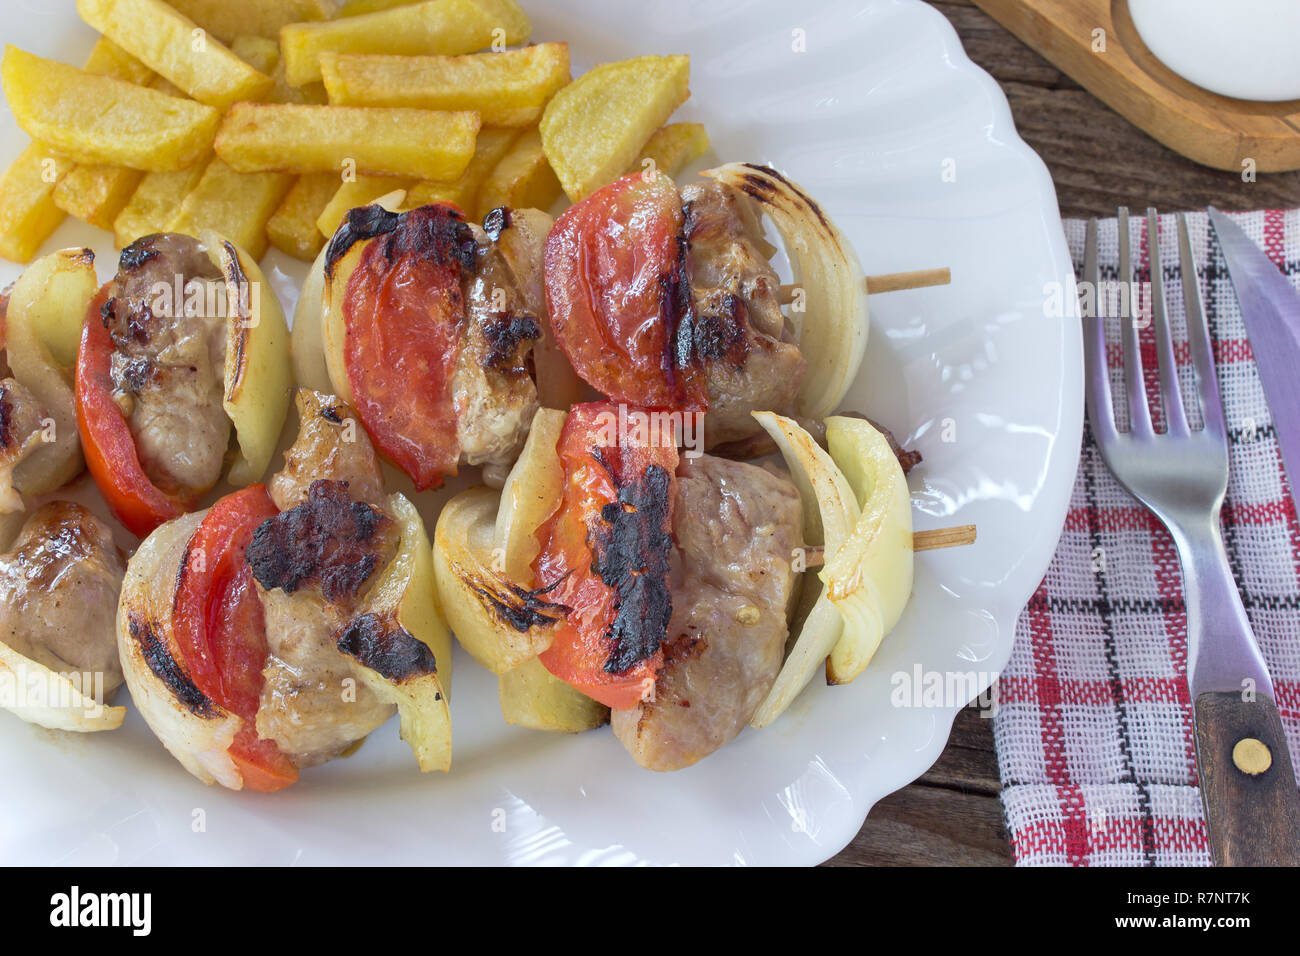 Grilled meat with vegetables on sticks in plate on table Stock Photo